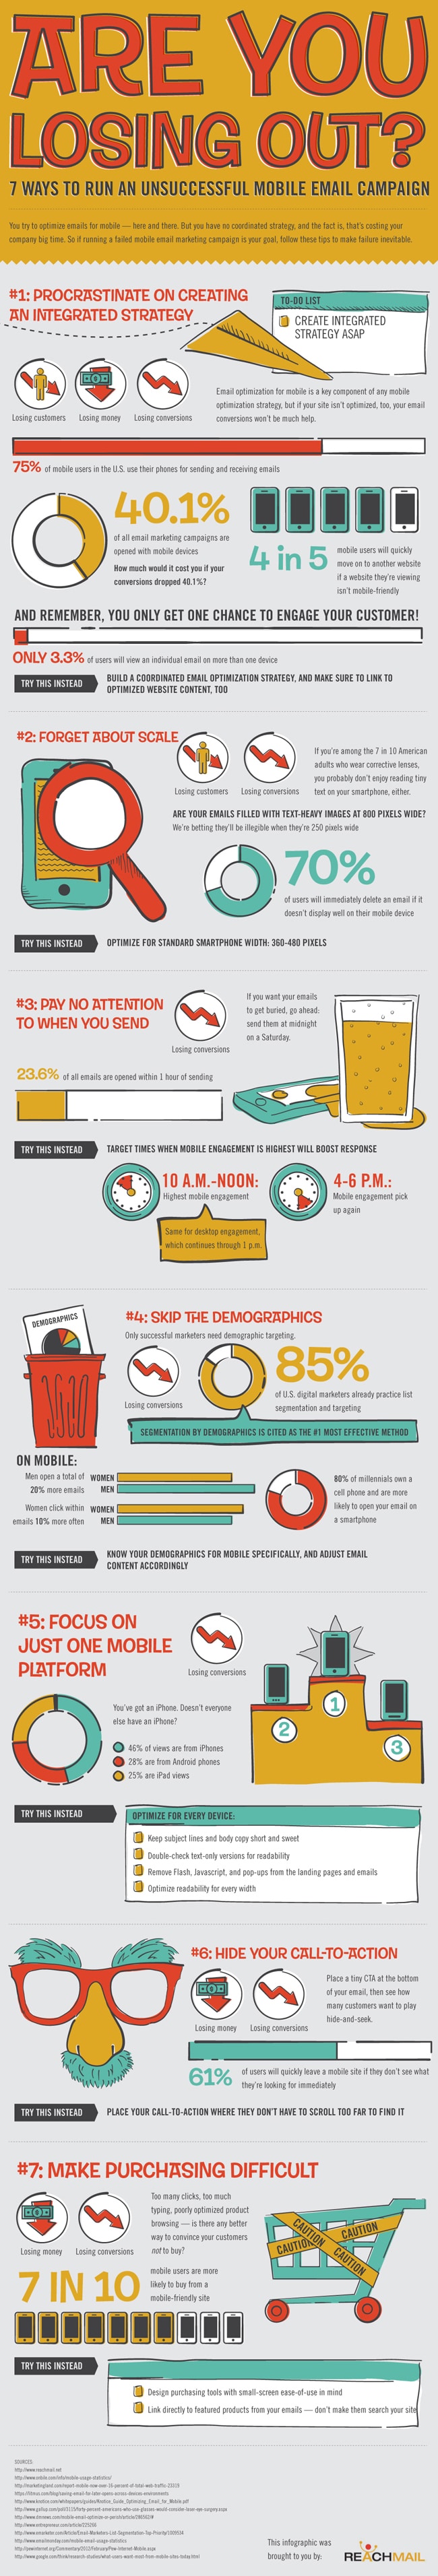 mobile-email-campaign-infographic